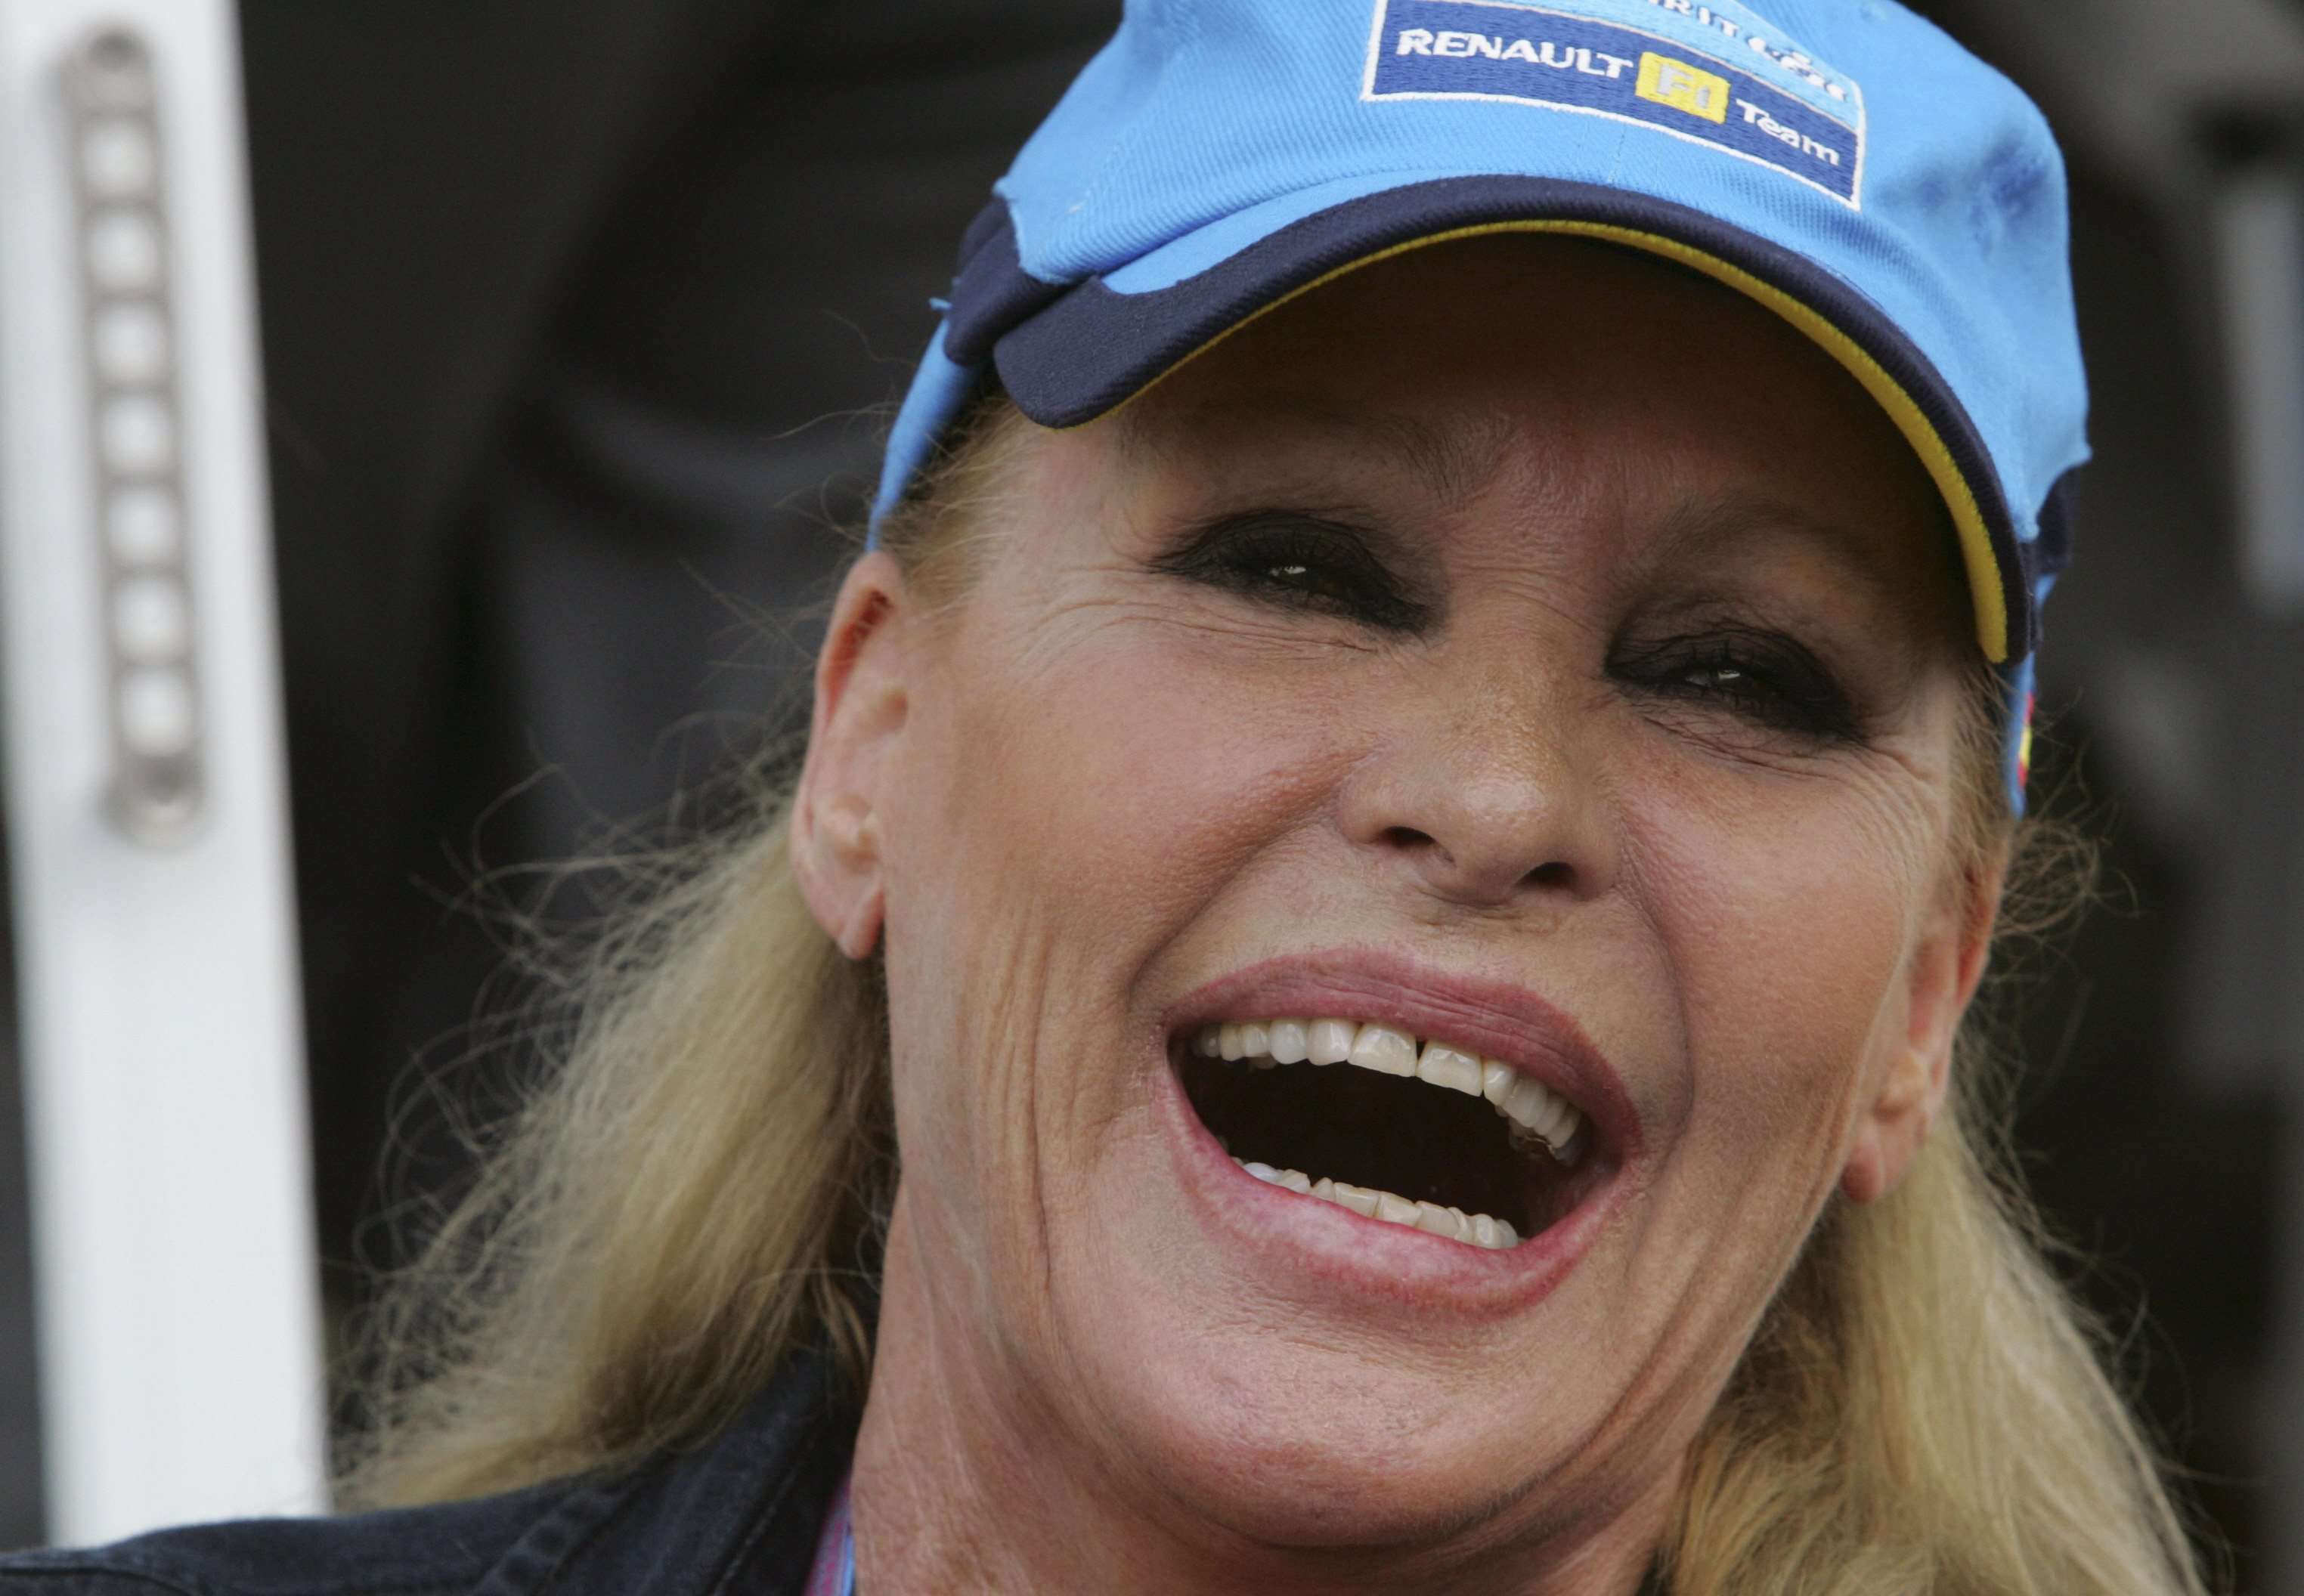 Ursula Andress laughs in the paddocks of the Istanbul racetrack before the start of the Turkish Grand Prix, in Istanbul, Turkey, August 21, 2005. | Source: Getty Images